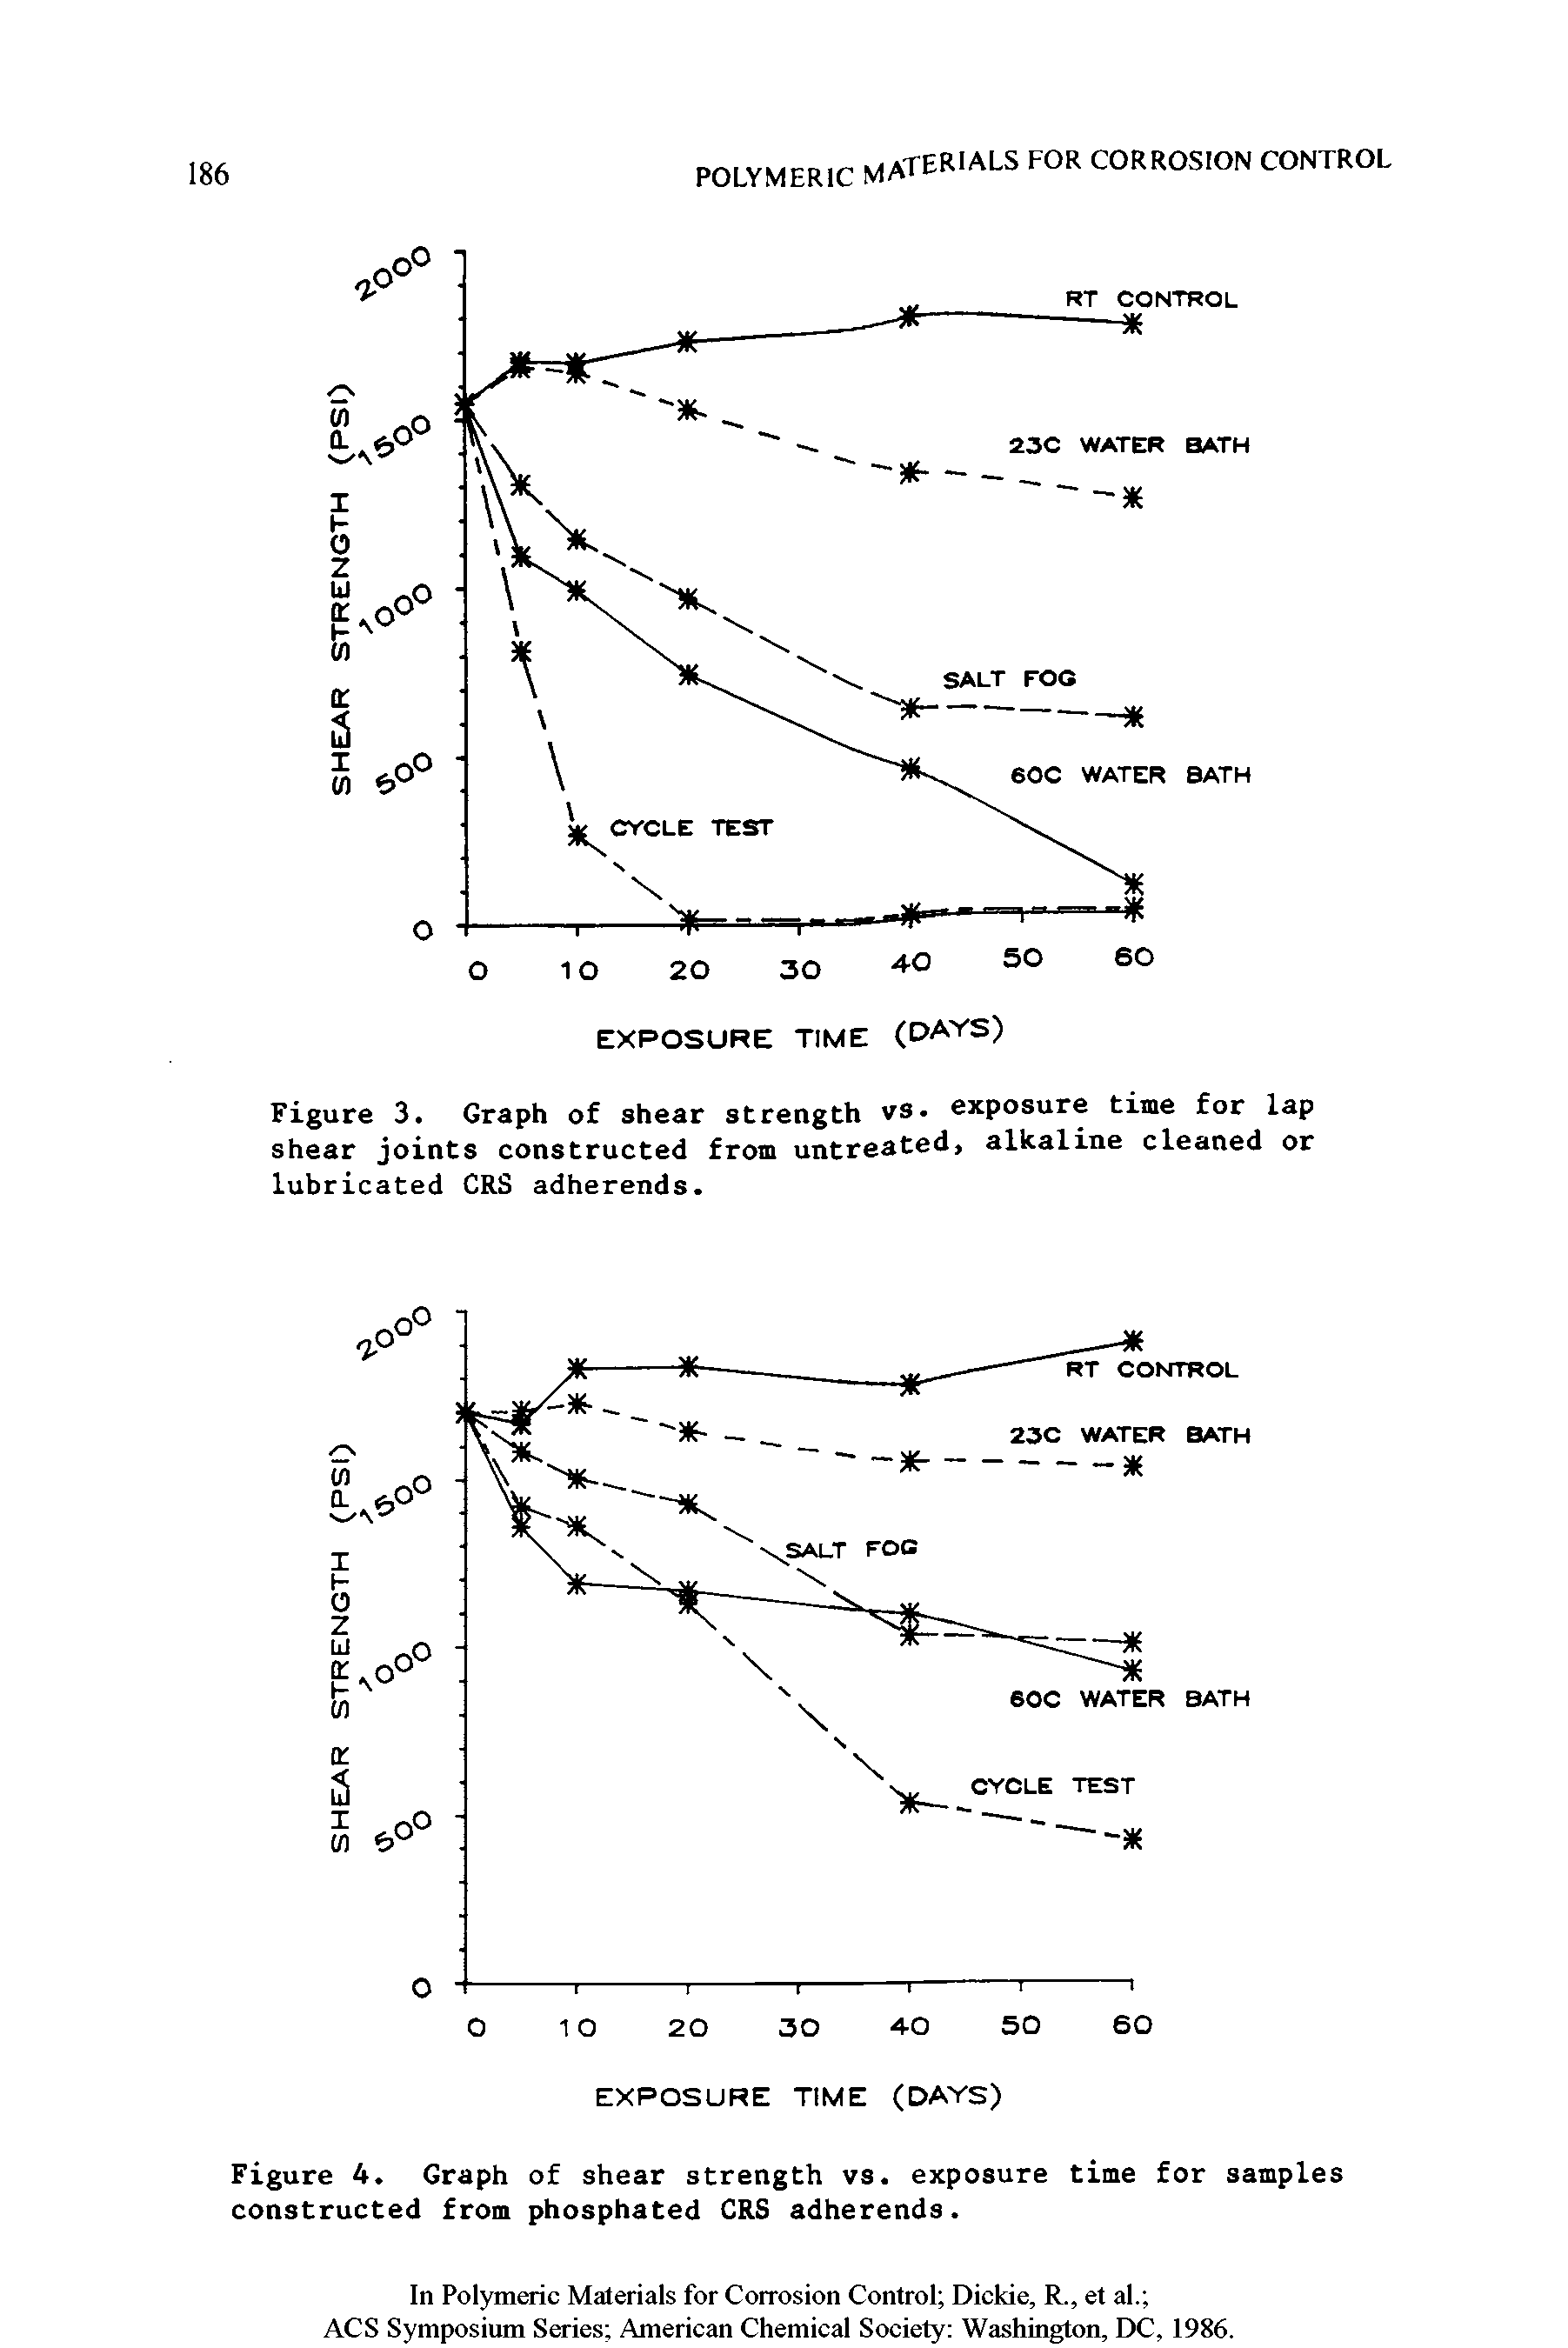 Figure 3. Graph of shear strength vs. exposure time for lap shear joints constructed from untreated, alkaline cleaned or lubricated CRS adherends.